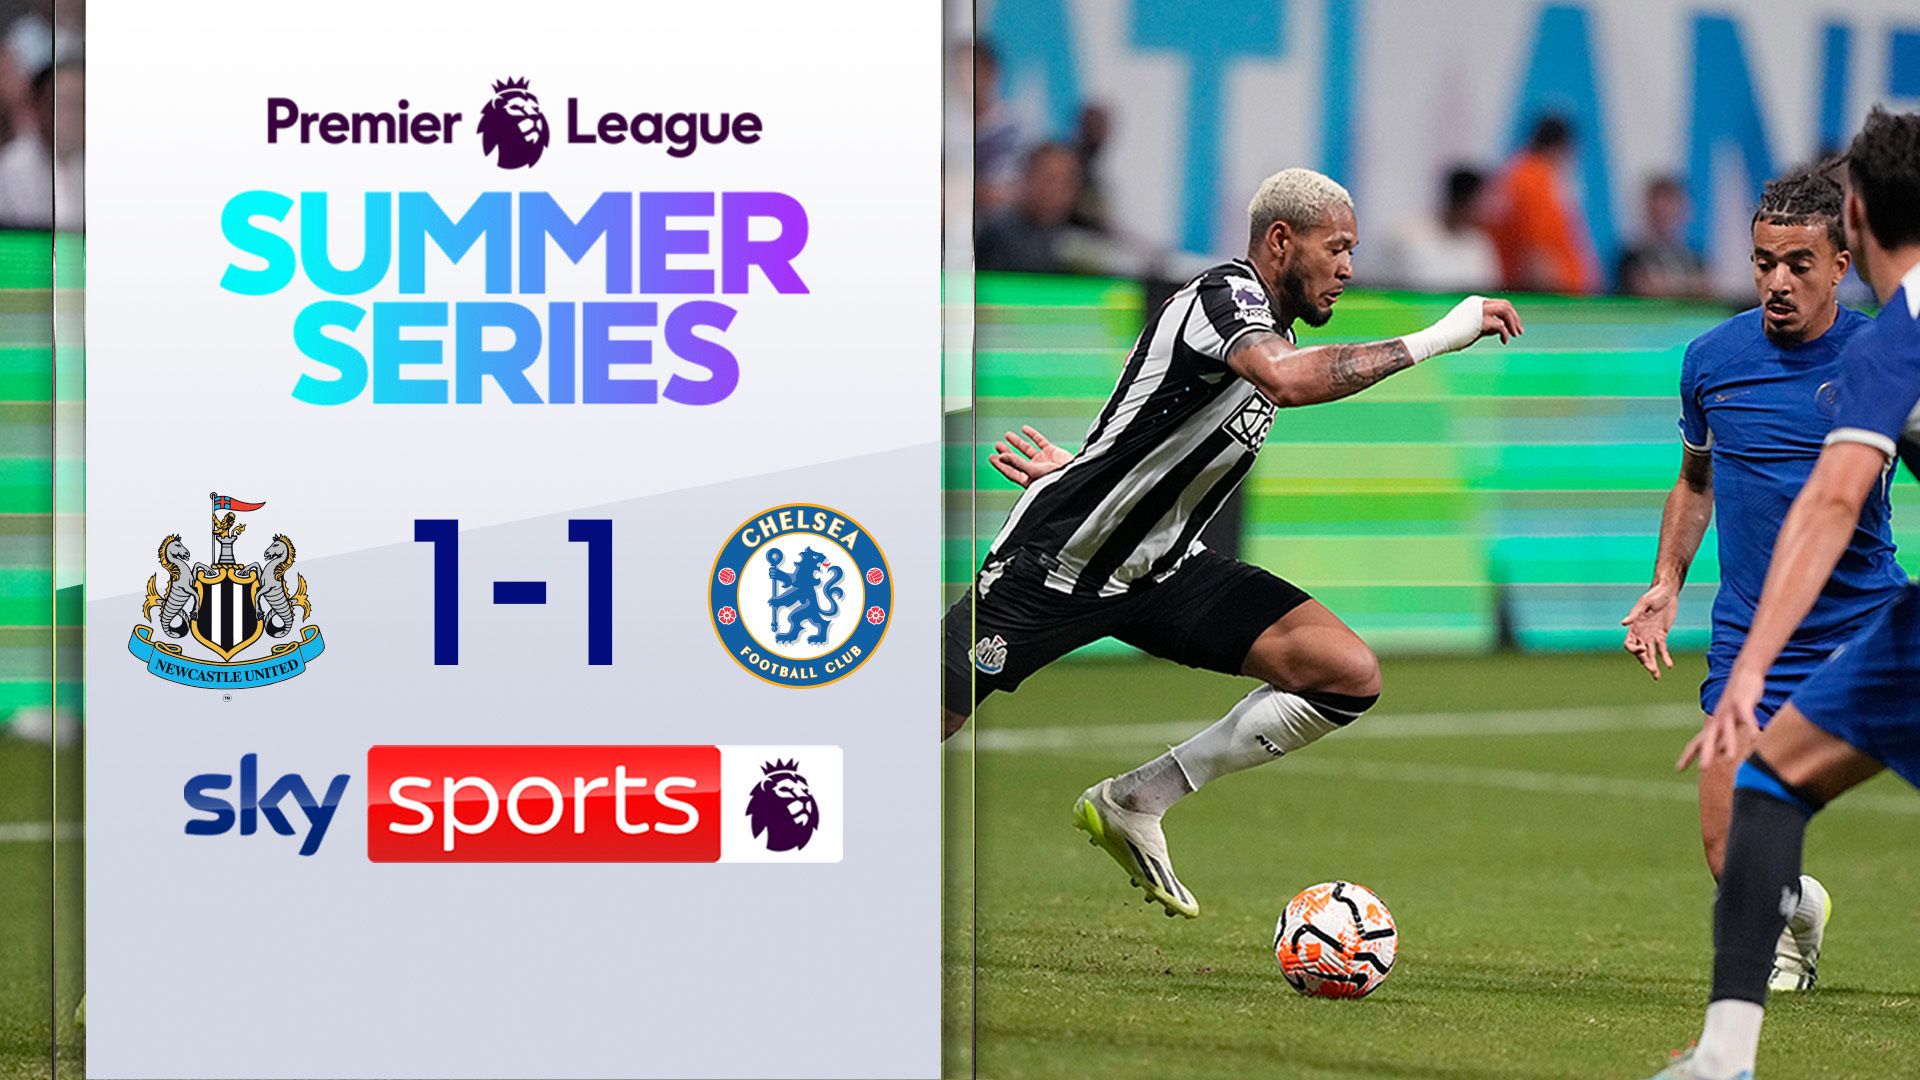 Newcastle 1-1 Chelsea | PL Summer Series highlights